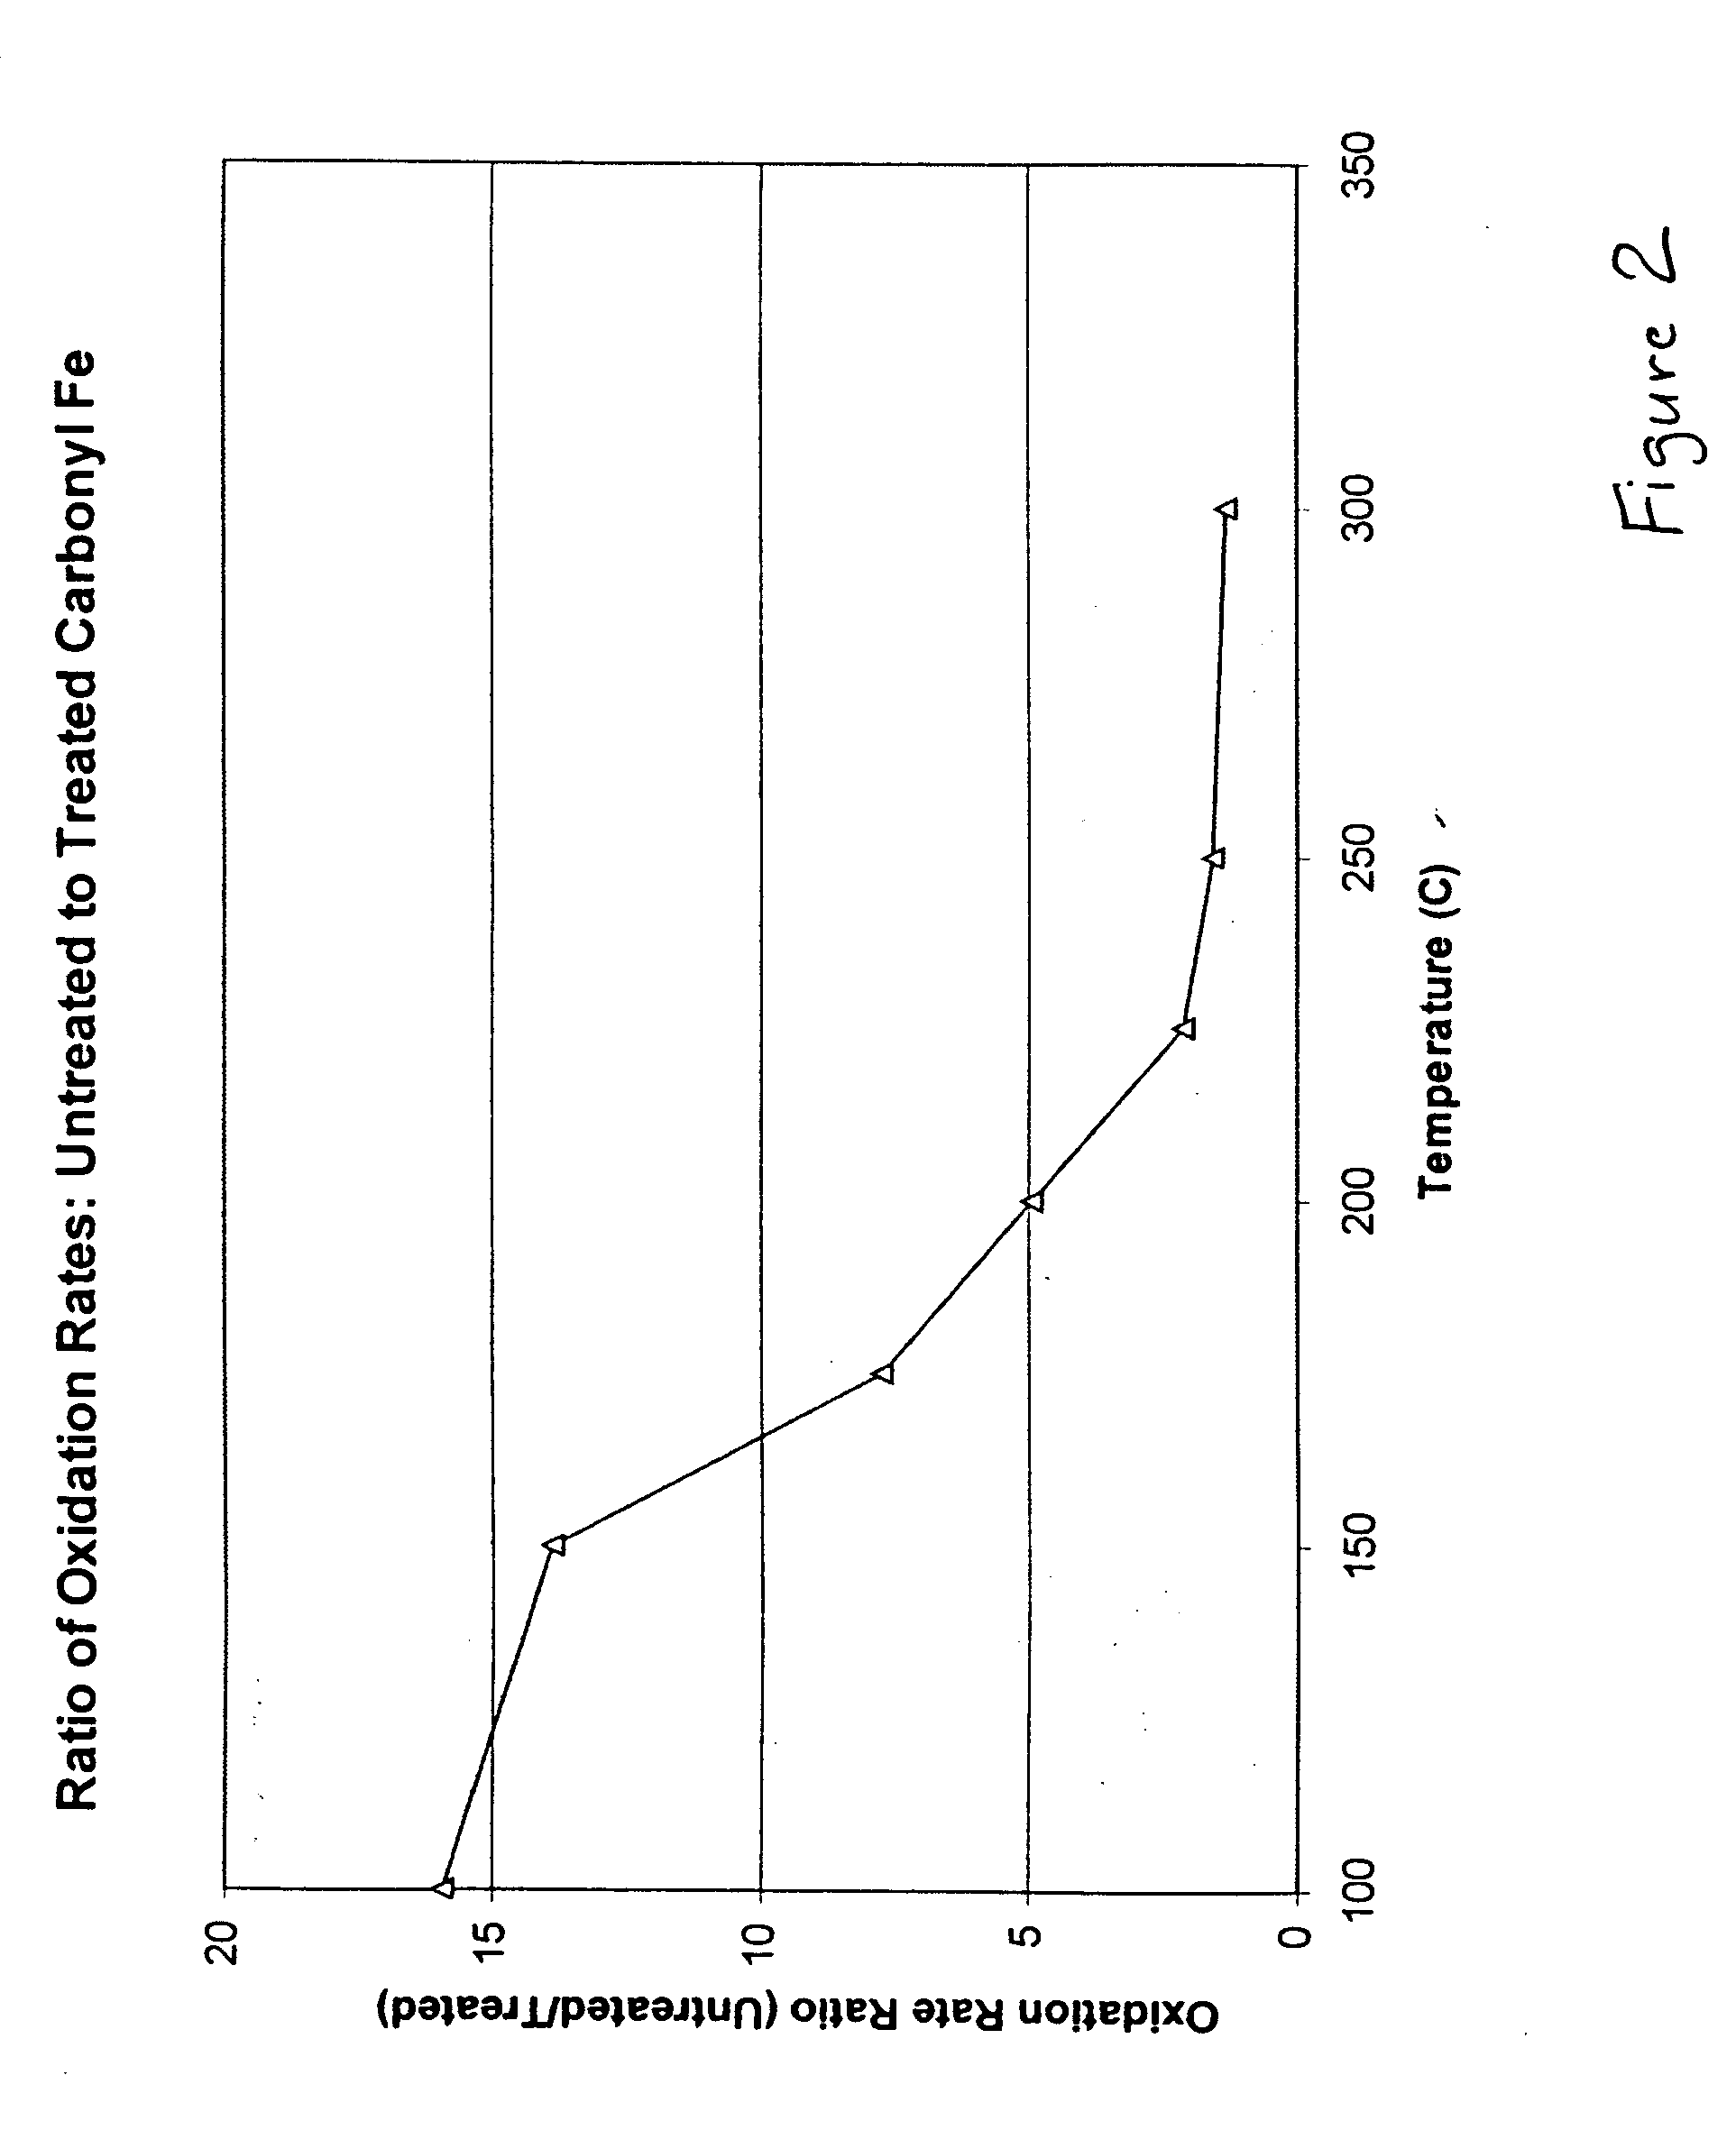 Hydrophobic metal particles for magnetorheological compositions